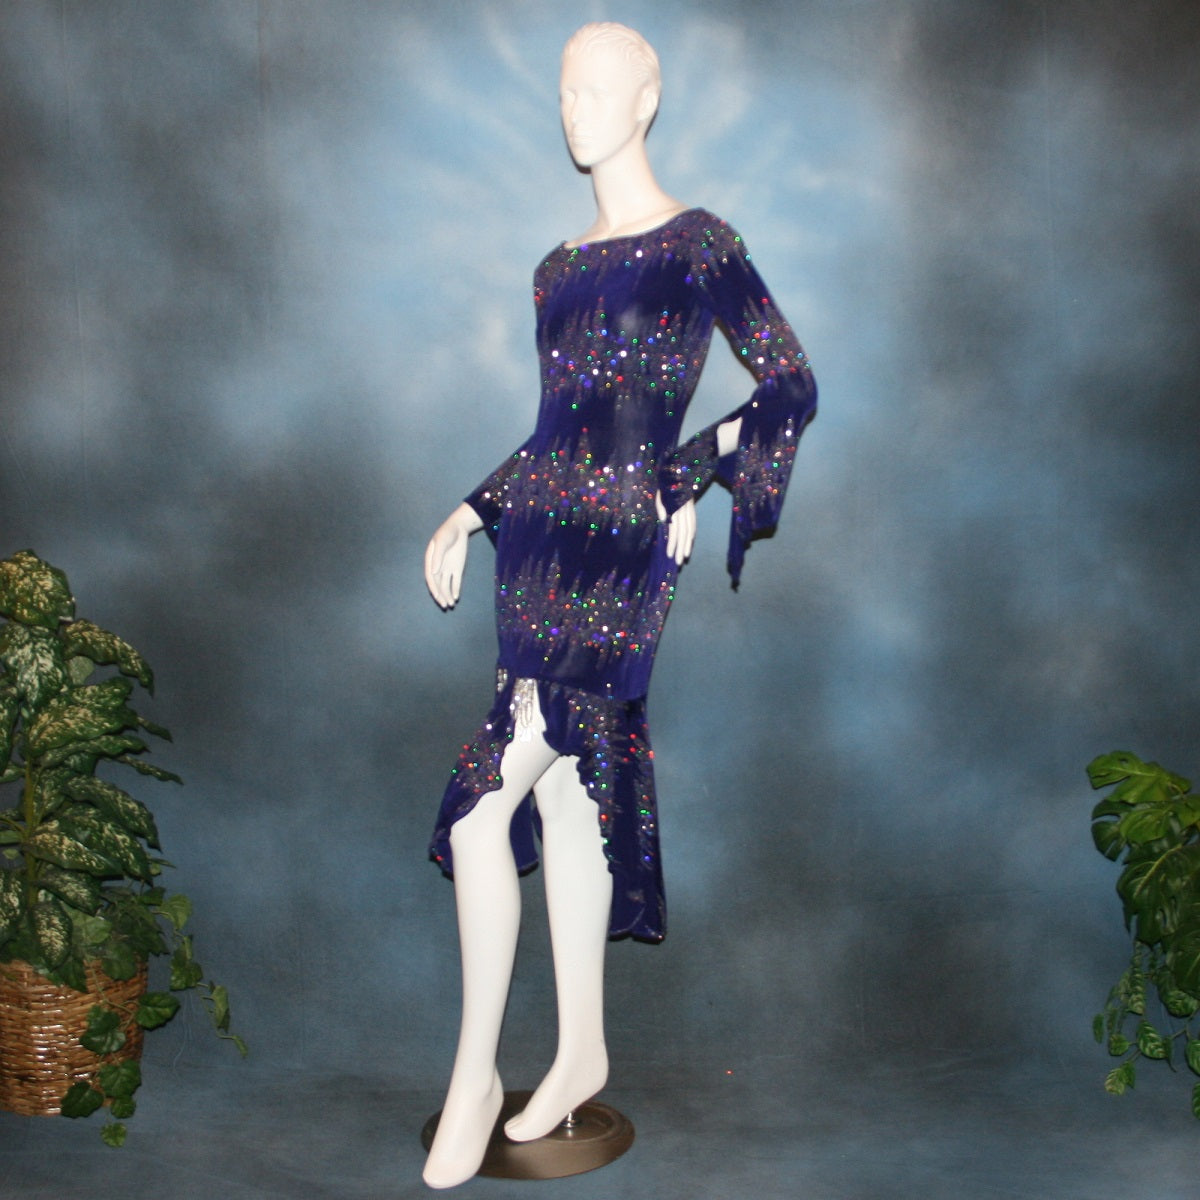 Deep royal purple Latin/rhythm/tango dress created in deep royal purple glitter slinky with an awesome electrifying glitter pattern features long flaired sleeves, lattice strap detailing up the low back & a touch of hand beading in skirting slits.